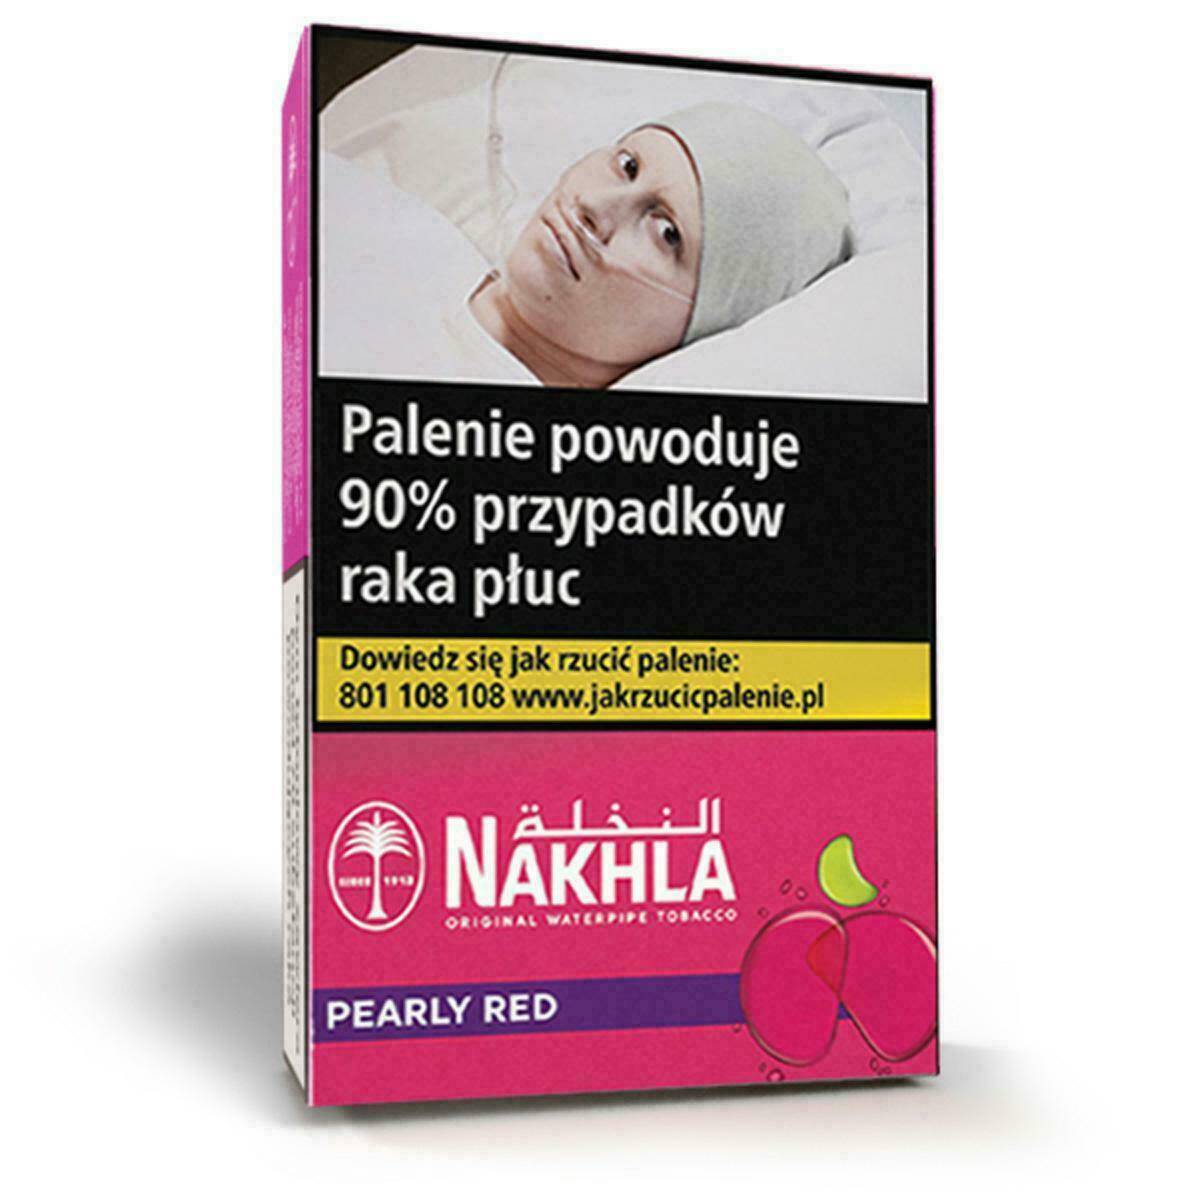 B24-Tyt.Nakhla Pearly Red 50g (38,90)